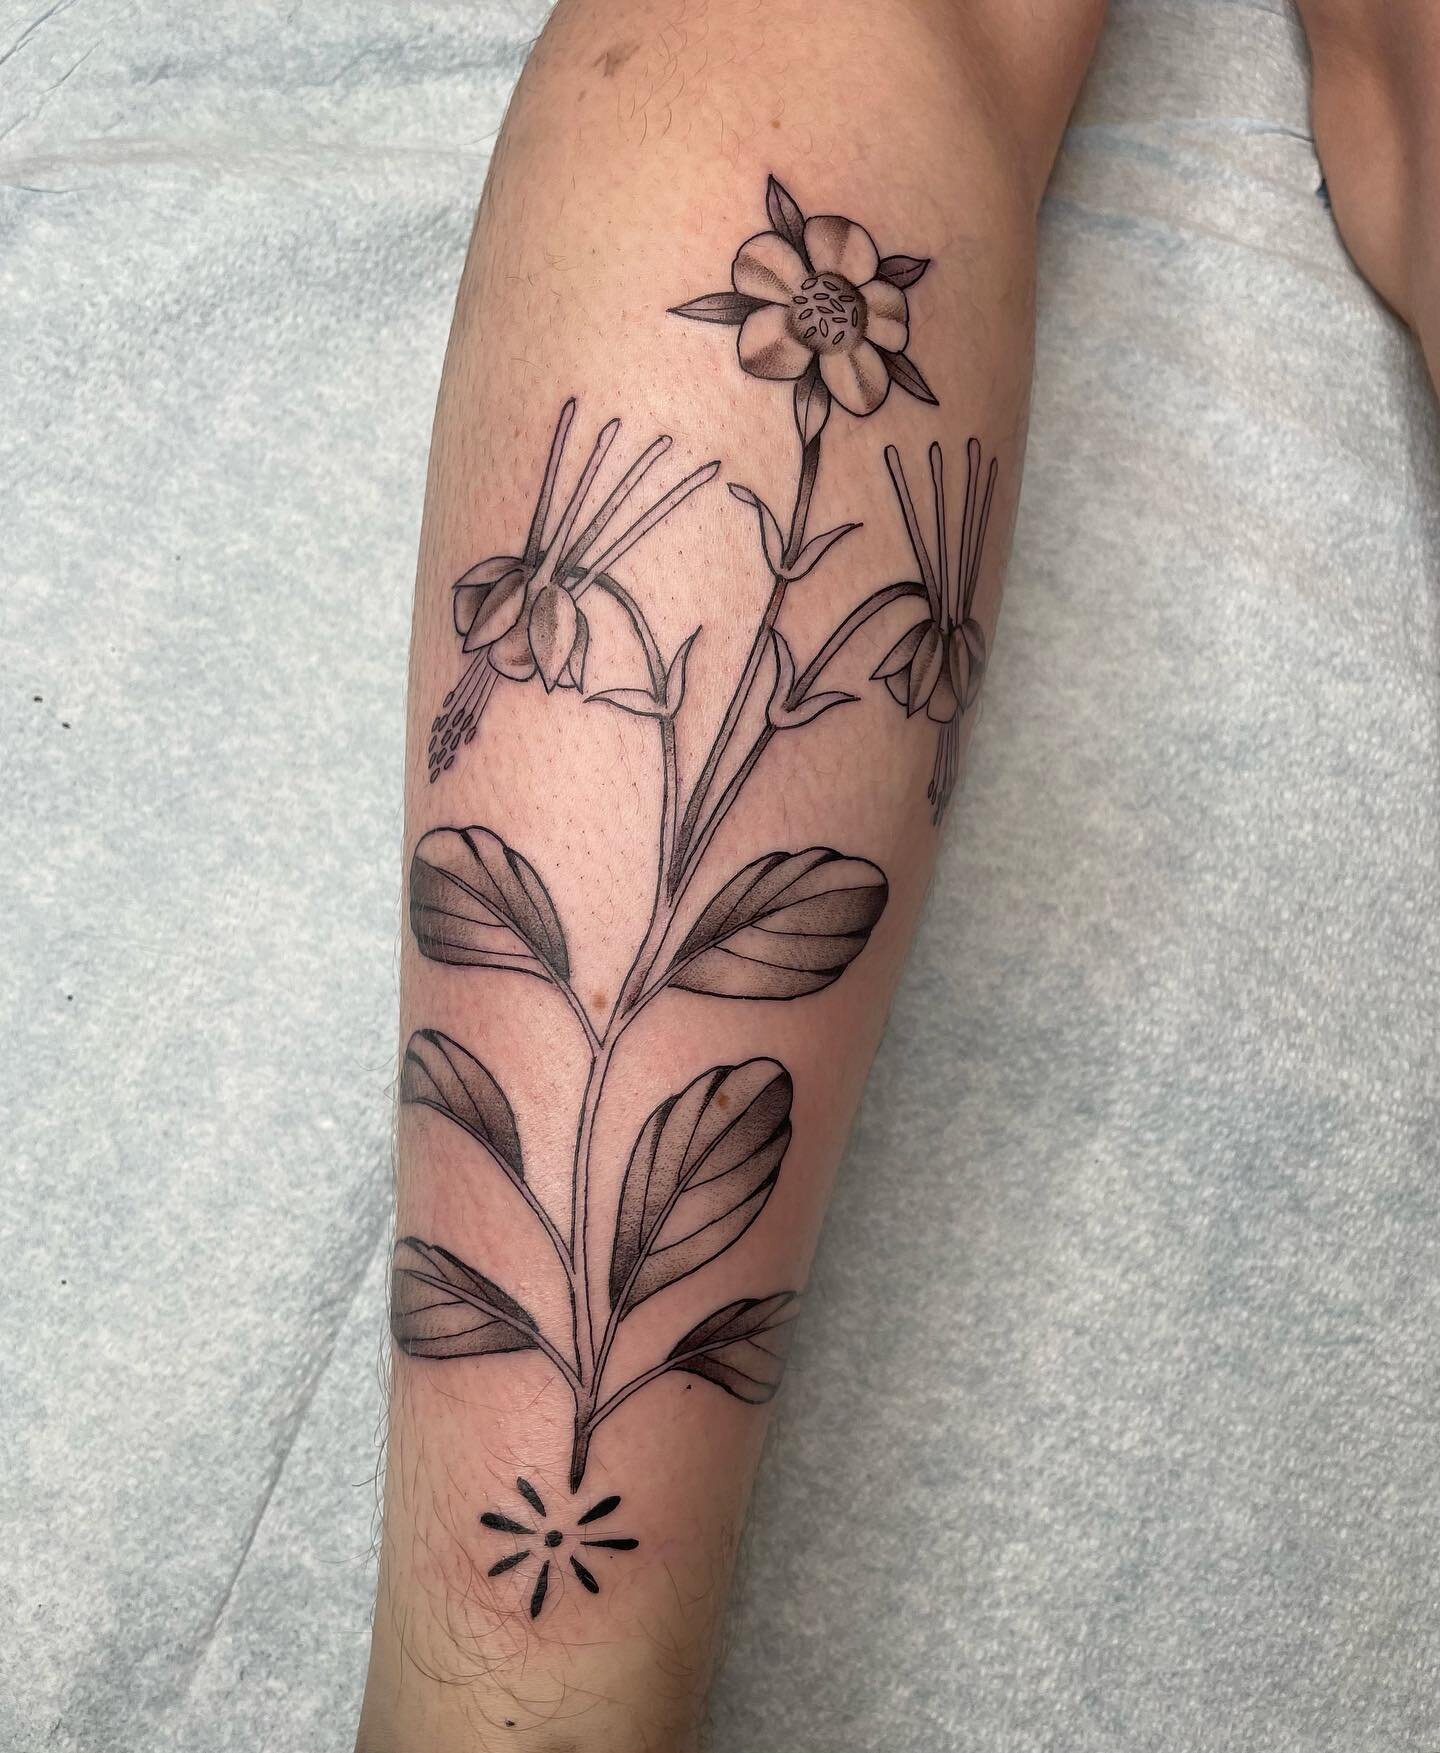 columbines are so cute. I love talking about plants with you guys 🌱 thank you Vivian!! 
.
.
.
.
.
.
.
.
.
.
.
.
#eugenetattoo #eugeneoregon #eugene #oregon #oregontattoo #pnw #pnwtattoo #botanicaltattoo #illustrativetattoo